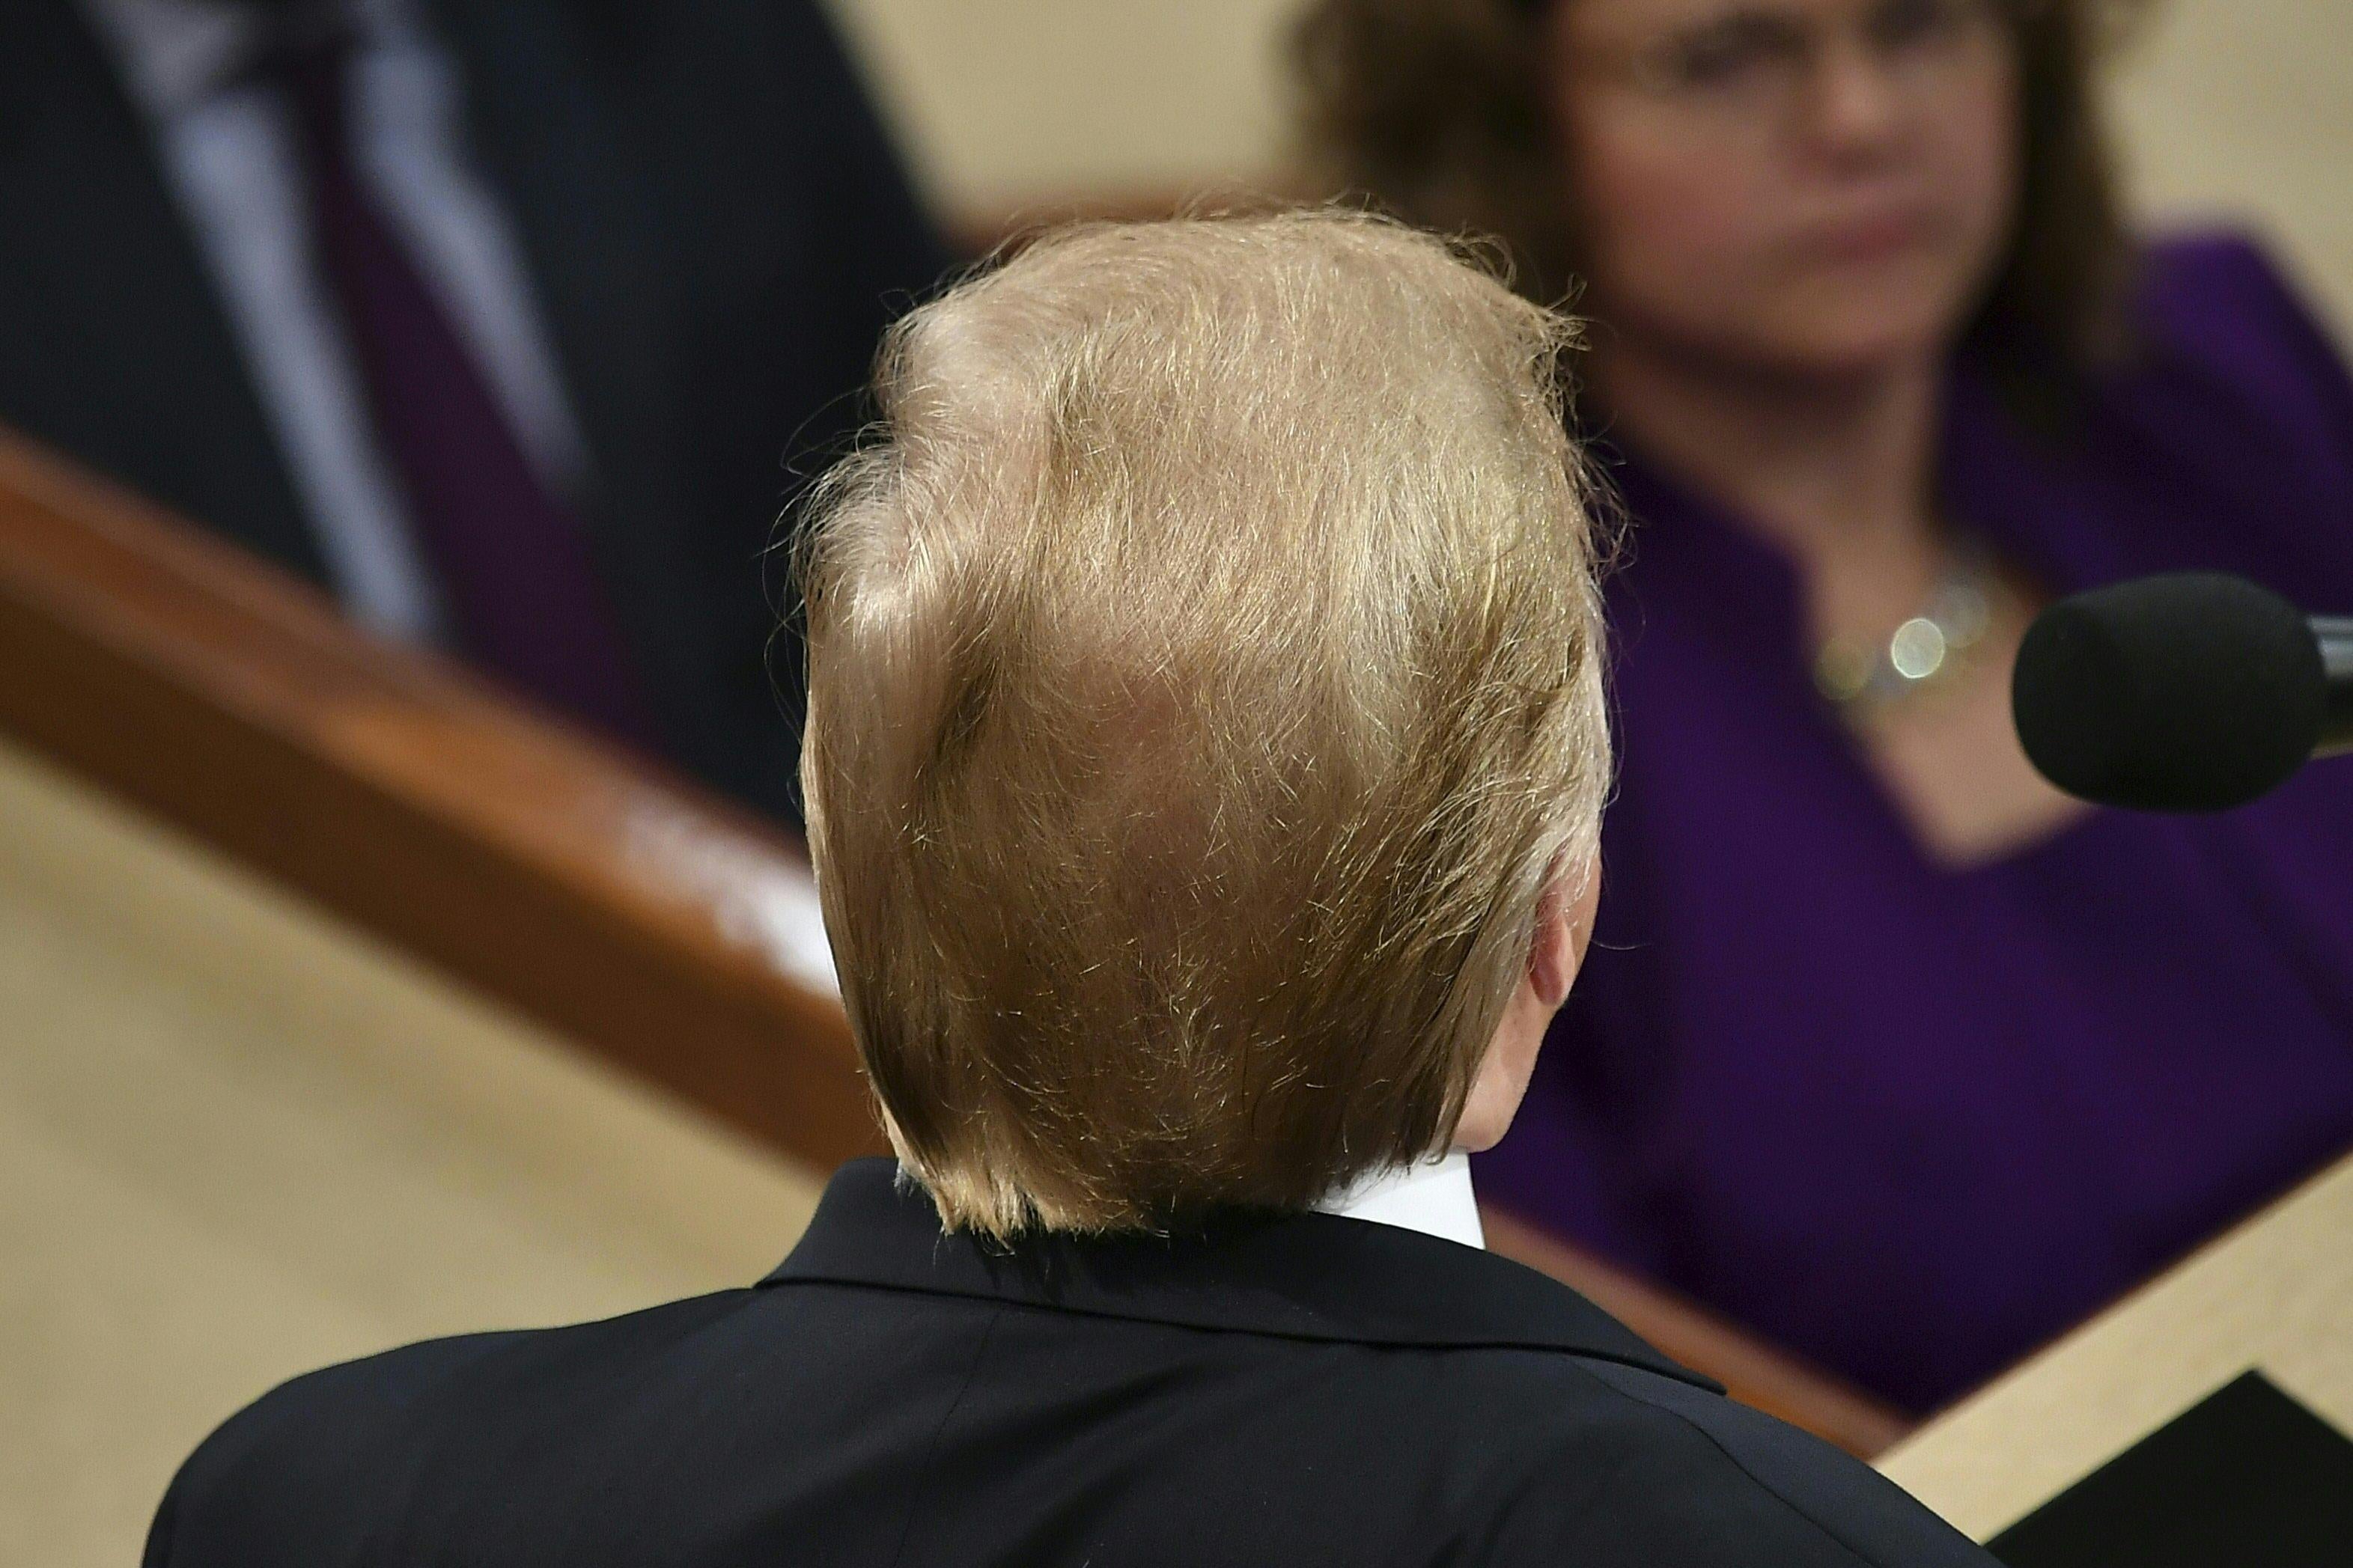 The back of Donald Trump's head.